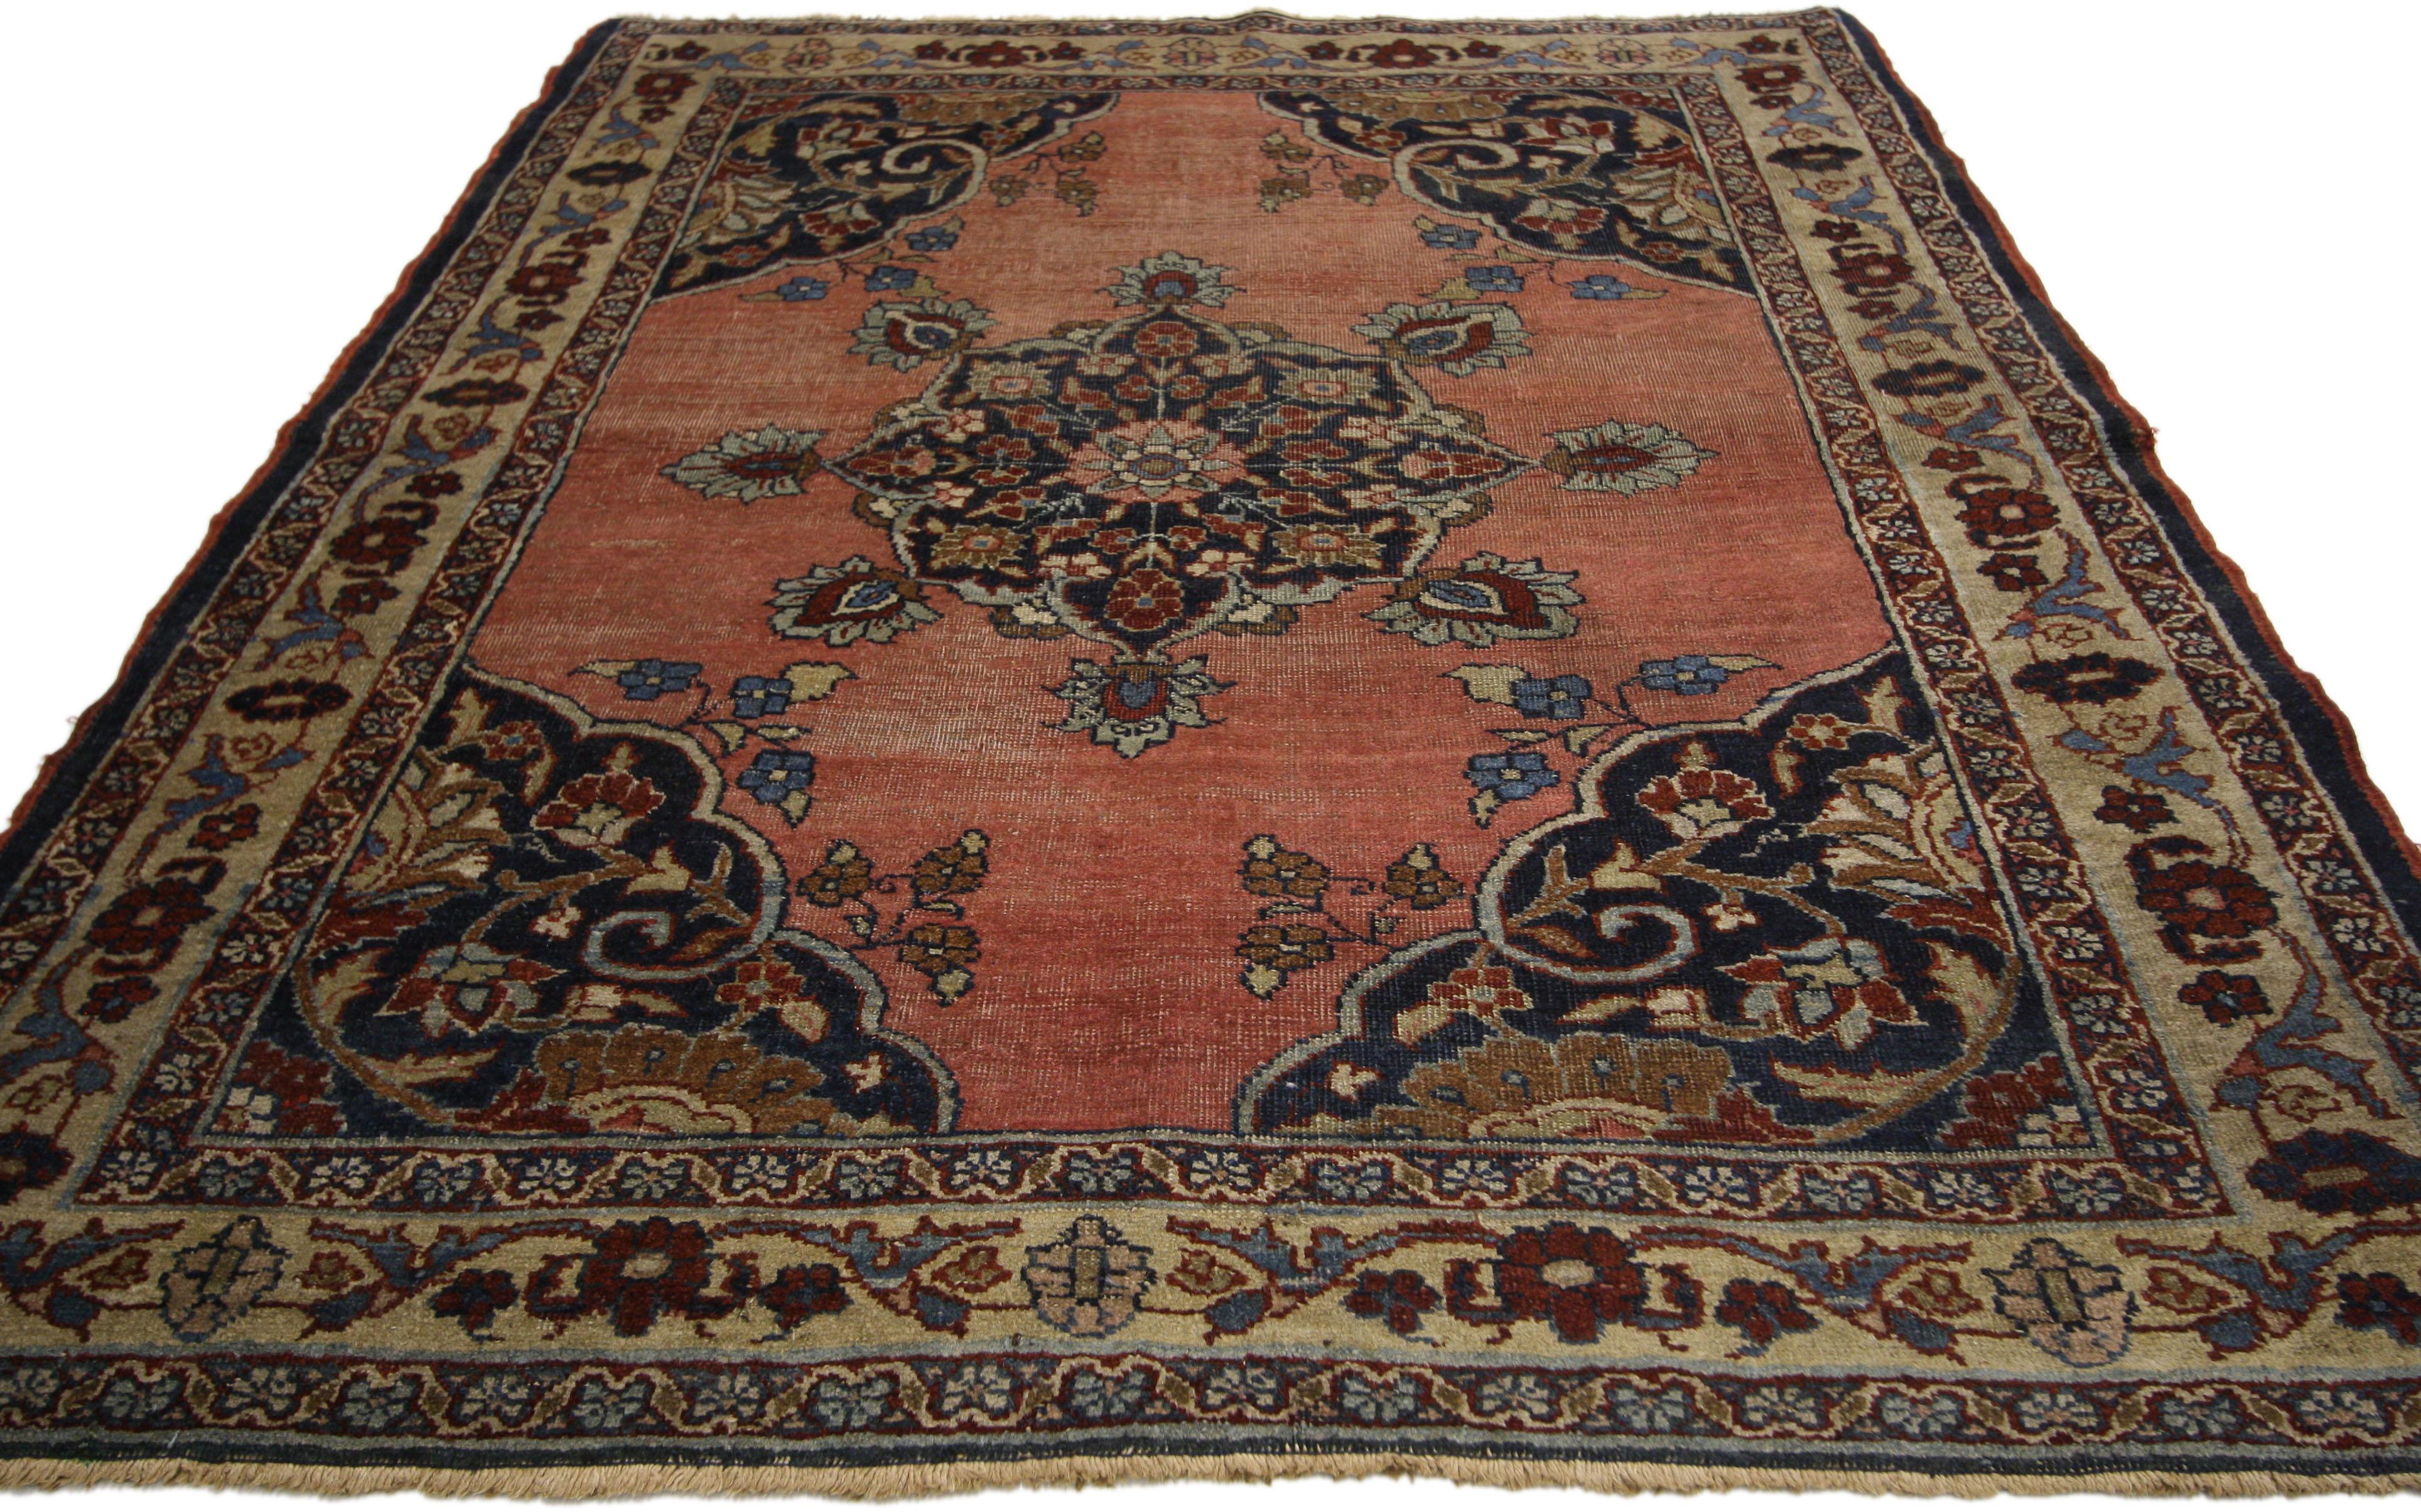 Vintage Persian Kurd Rug with Modern Industrial Style In Good Condition For Sale In Dallas, TX